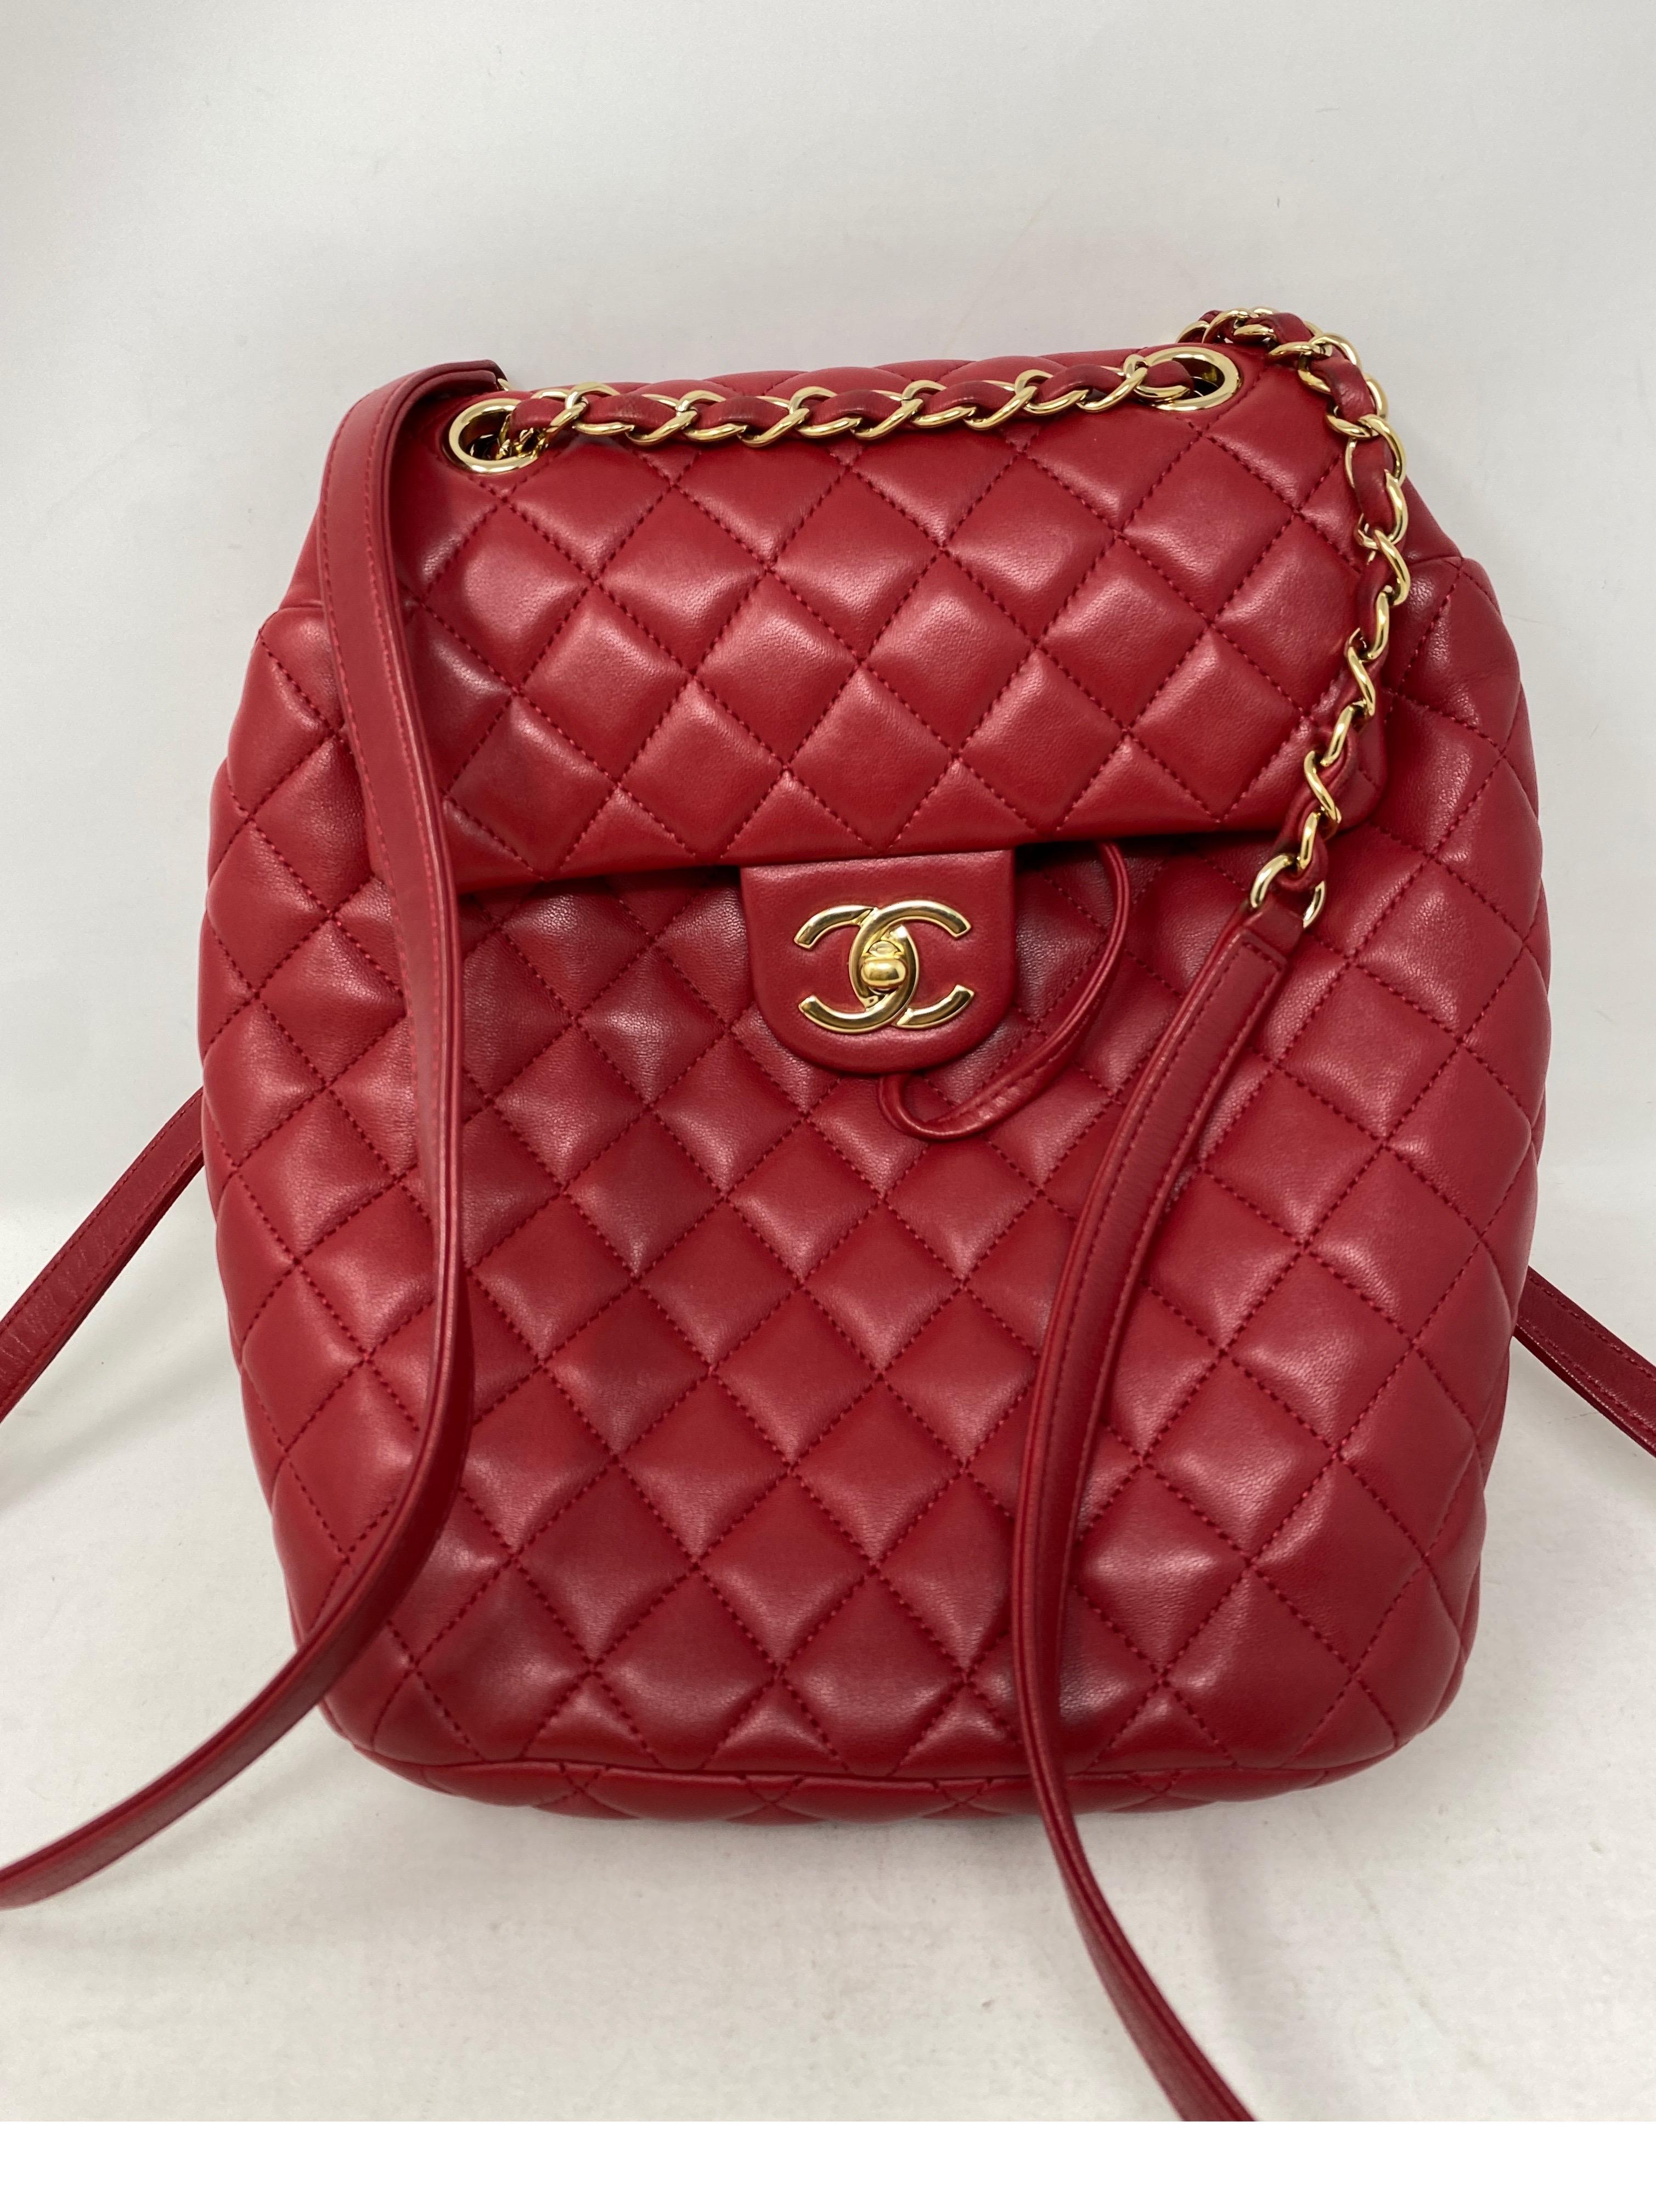 Chanel Red Leather Backpack. Beautiful red with gold hardware. Excellent like new condition. The perfect size. Hard to find backpack. Includes authenticity card. Guaranteed authentic. 